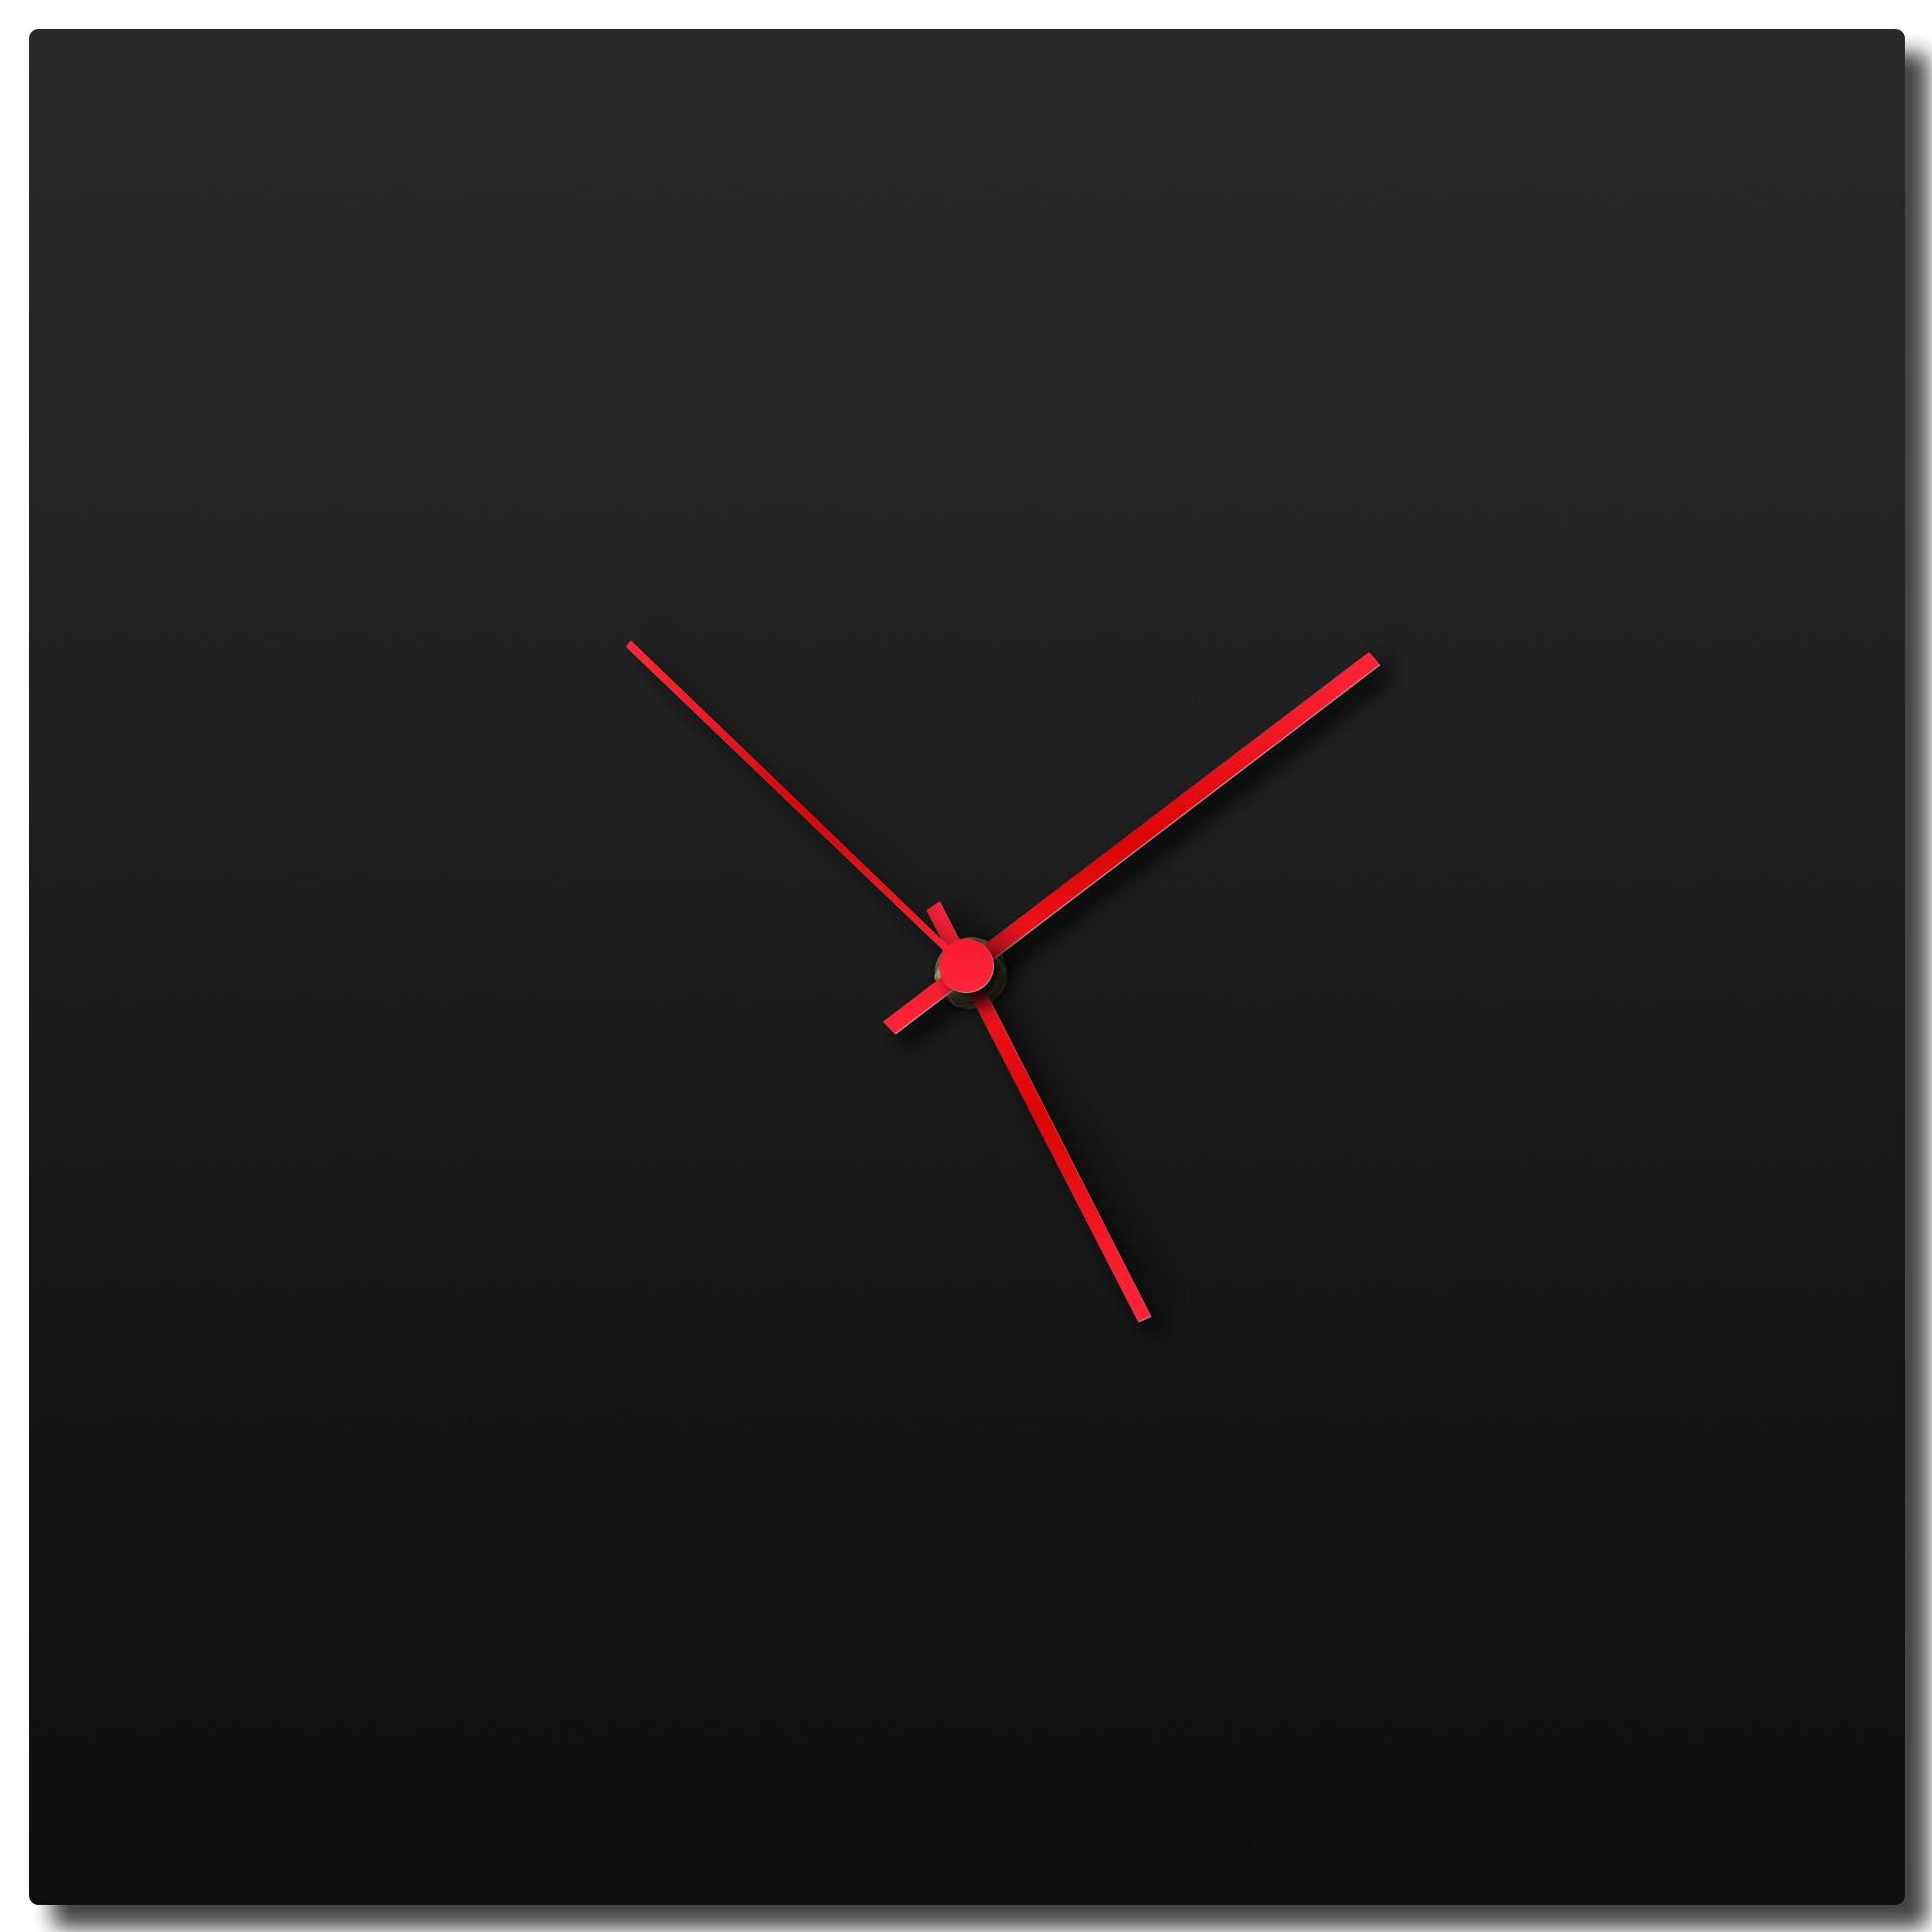 Metal Art Studio – Blackout Square Clock Large – Minimalist Modern Within Most Up To Date Square Black Metal Wall Art (View 18 of 20)